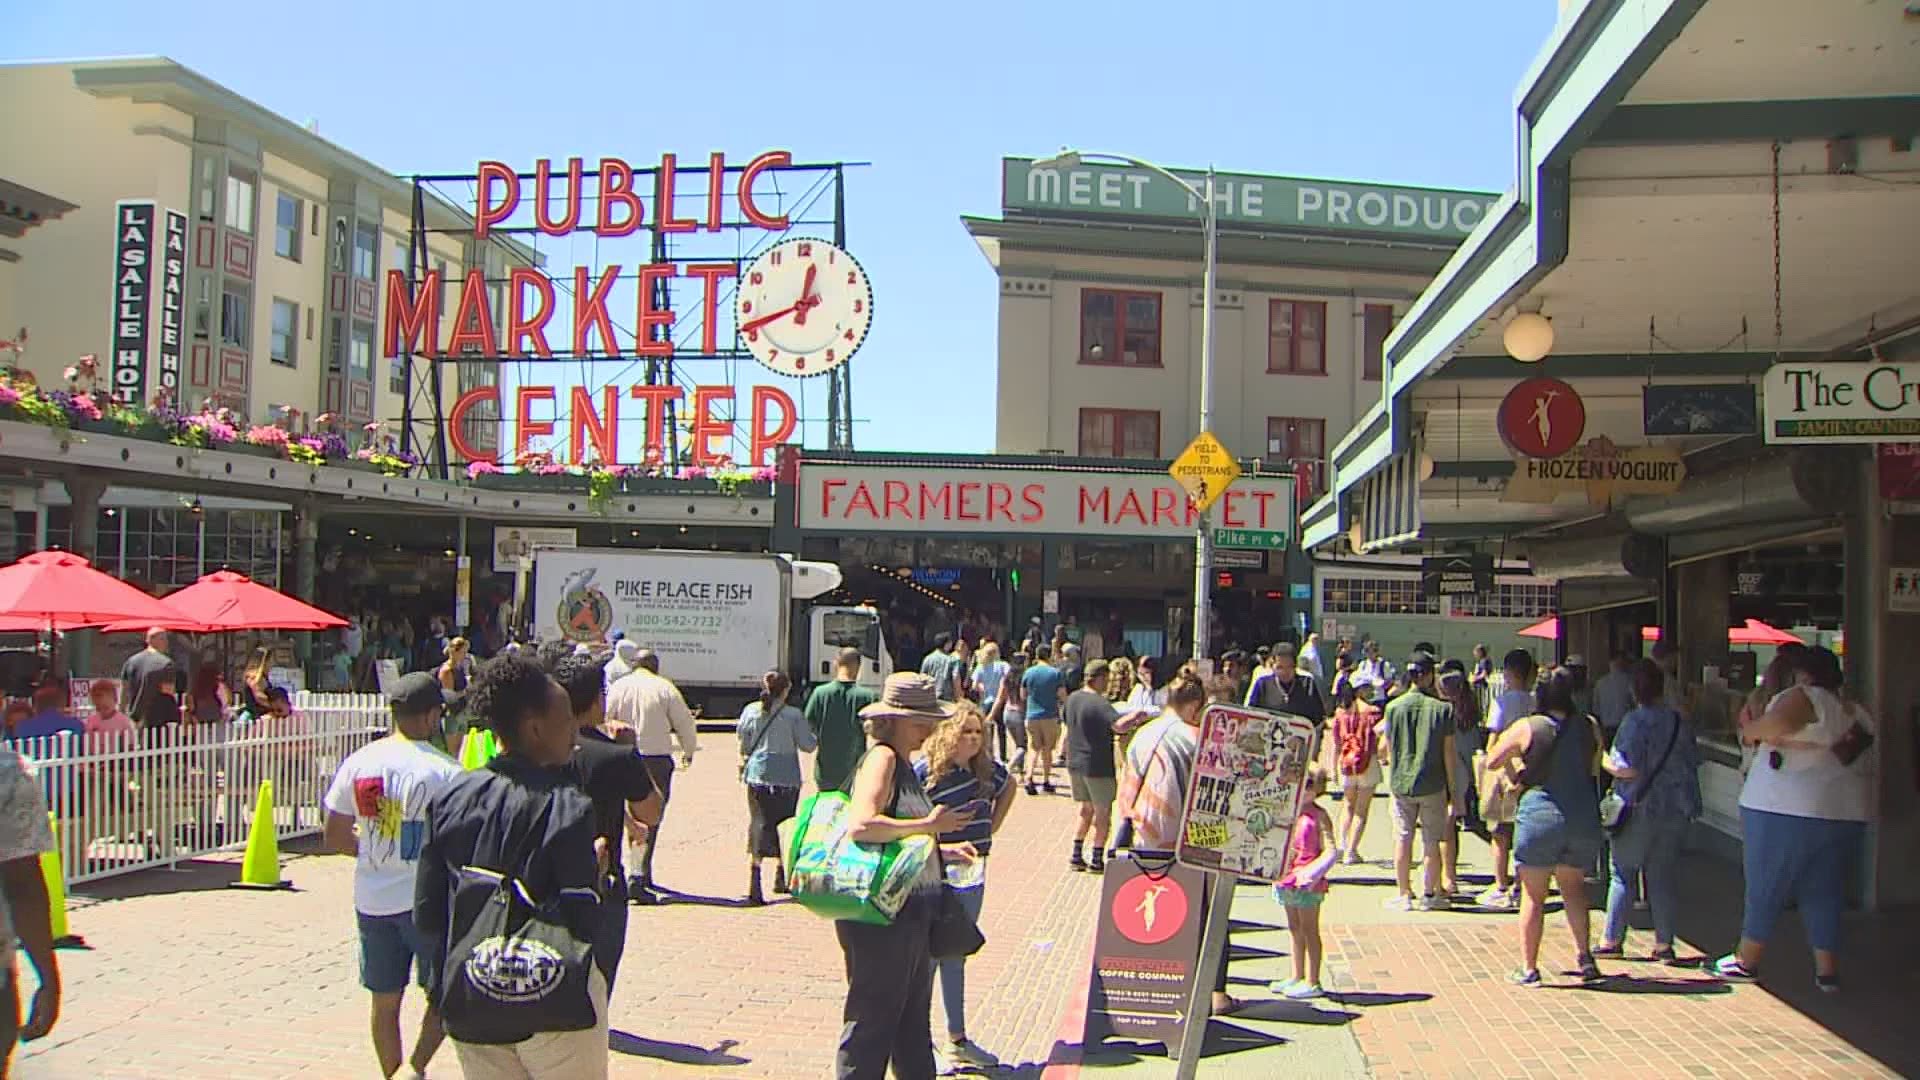 One of Seattle's most iconic tourist destinations is seeing a resurgence in visitors from tourists and locals alike as summer gets in full swing.